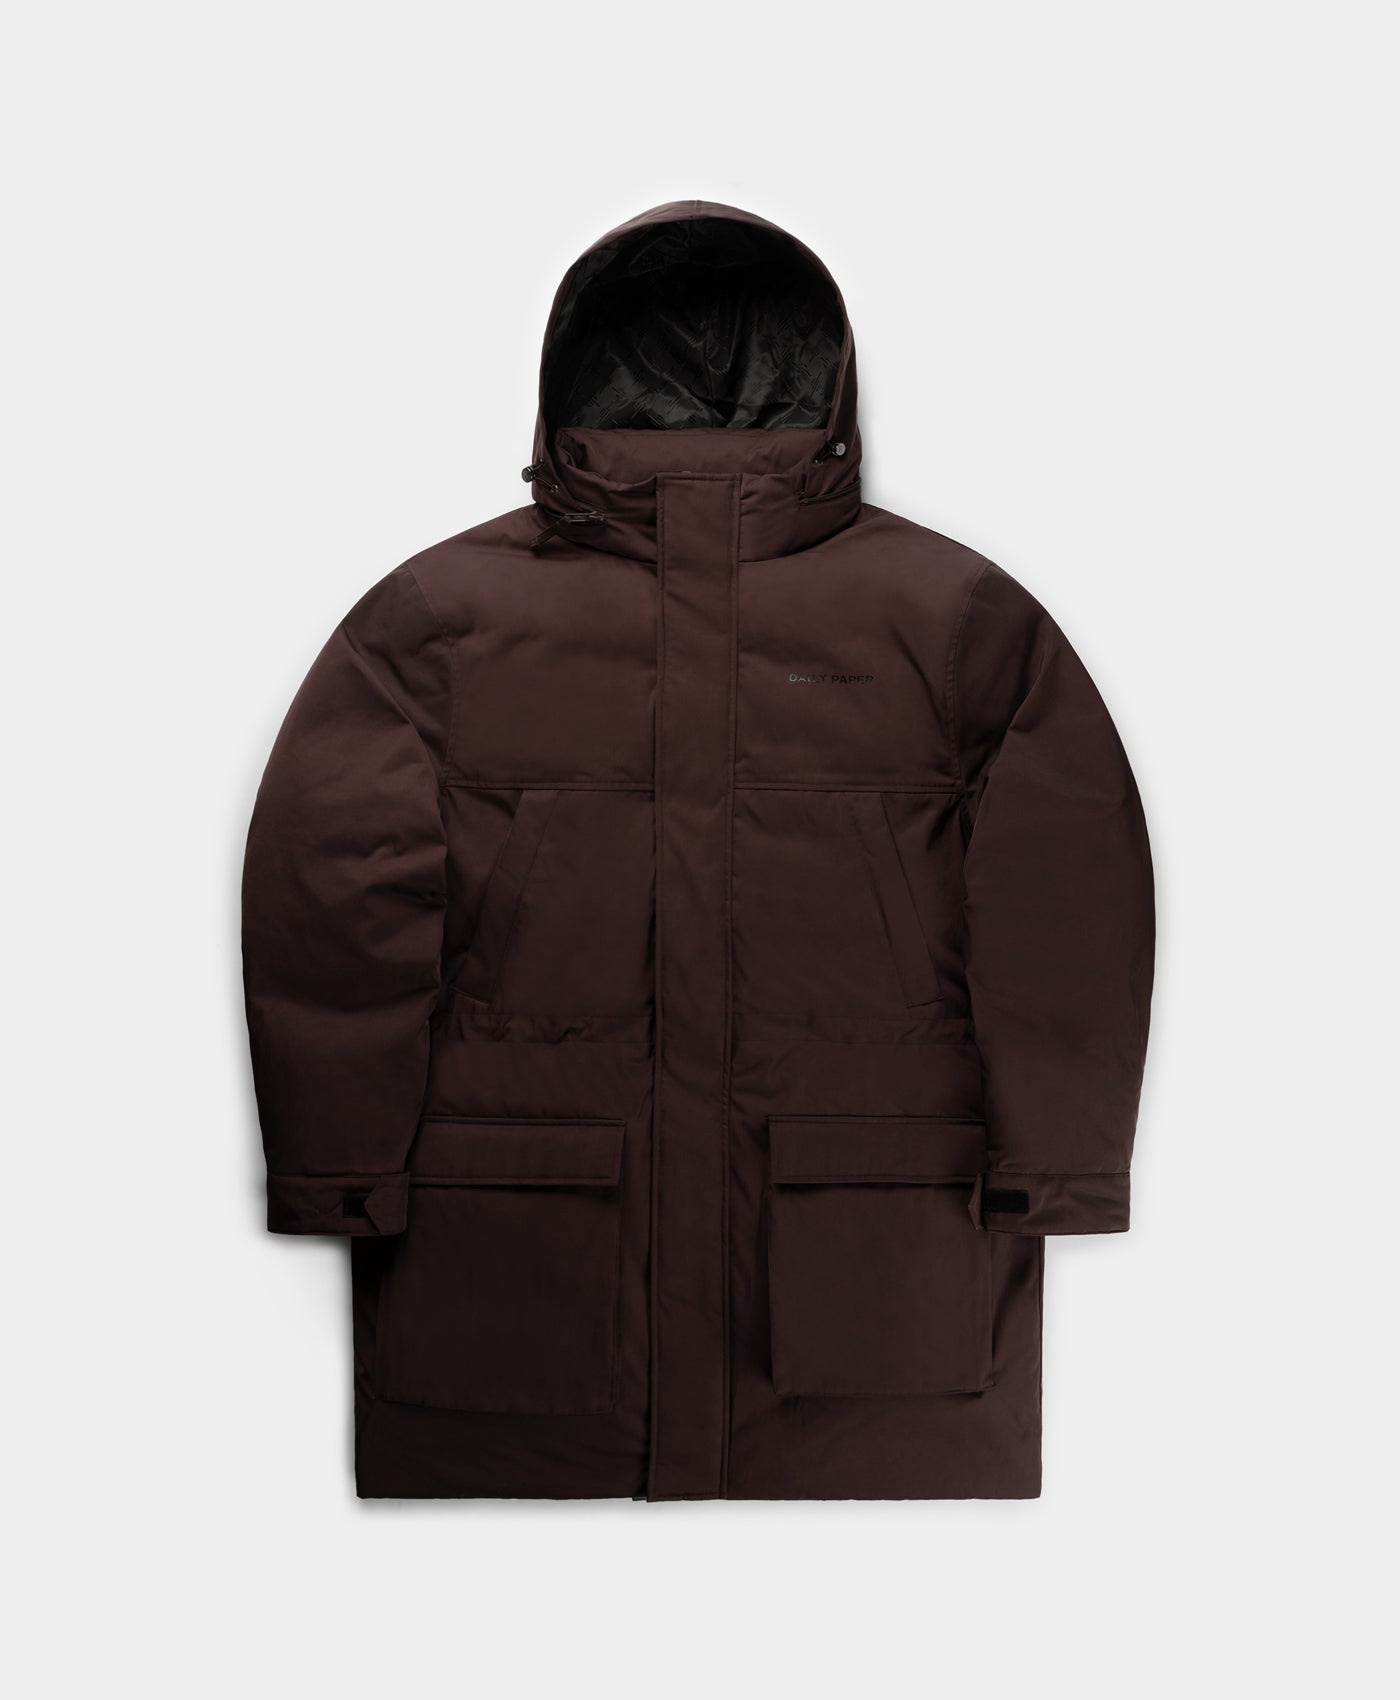 DP - Syrup Brown Ronnie Lng Jacket - Packshot - Front 